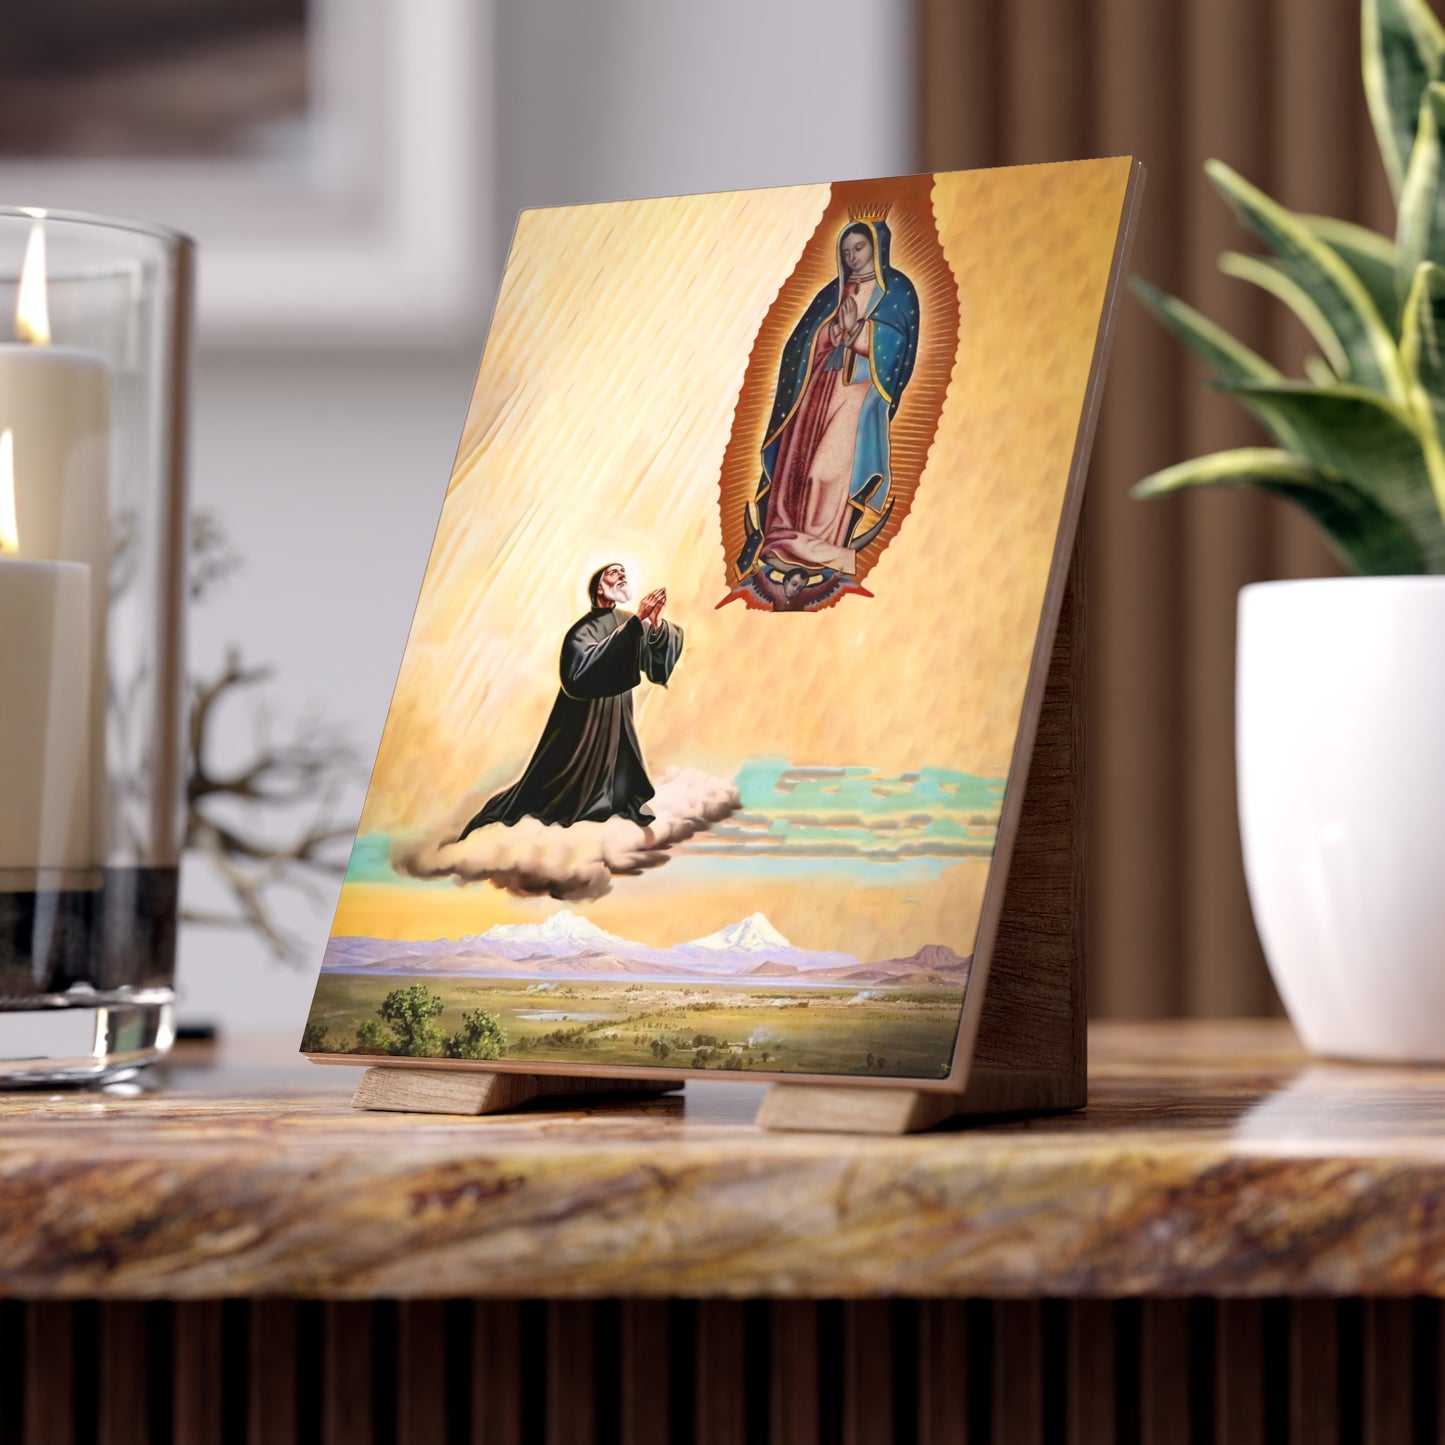 San Chárbel, Hermano, ya eres Mexicano - Ceramic Photo Icon with Our Lady of Guadalupe pray for Mexico Size 6"x8"